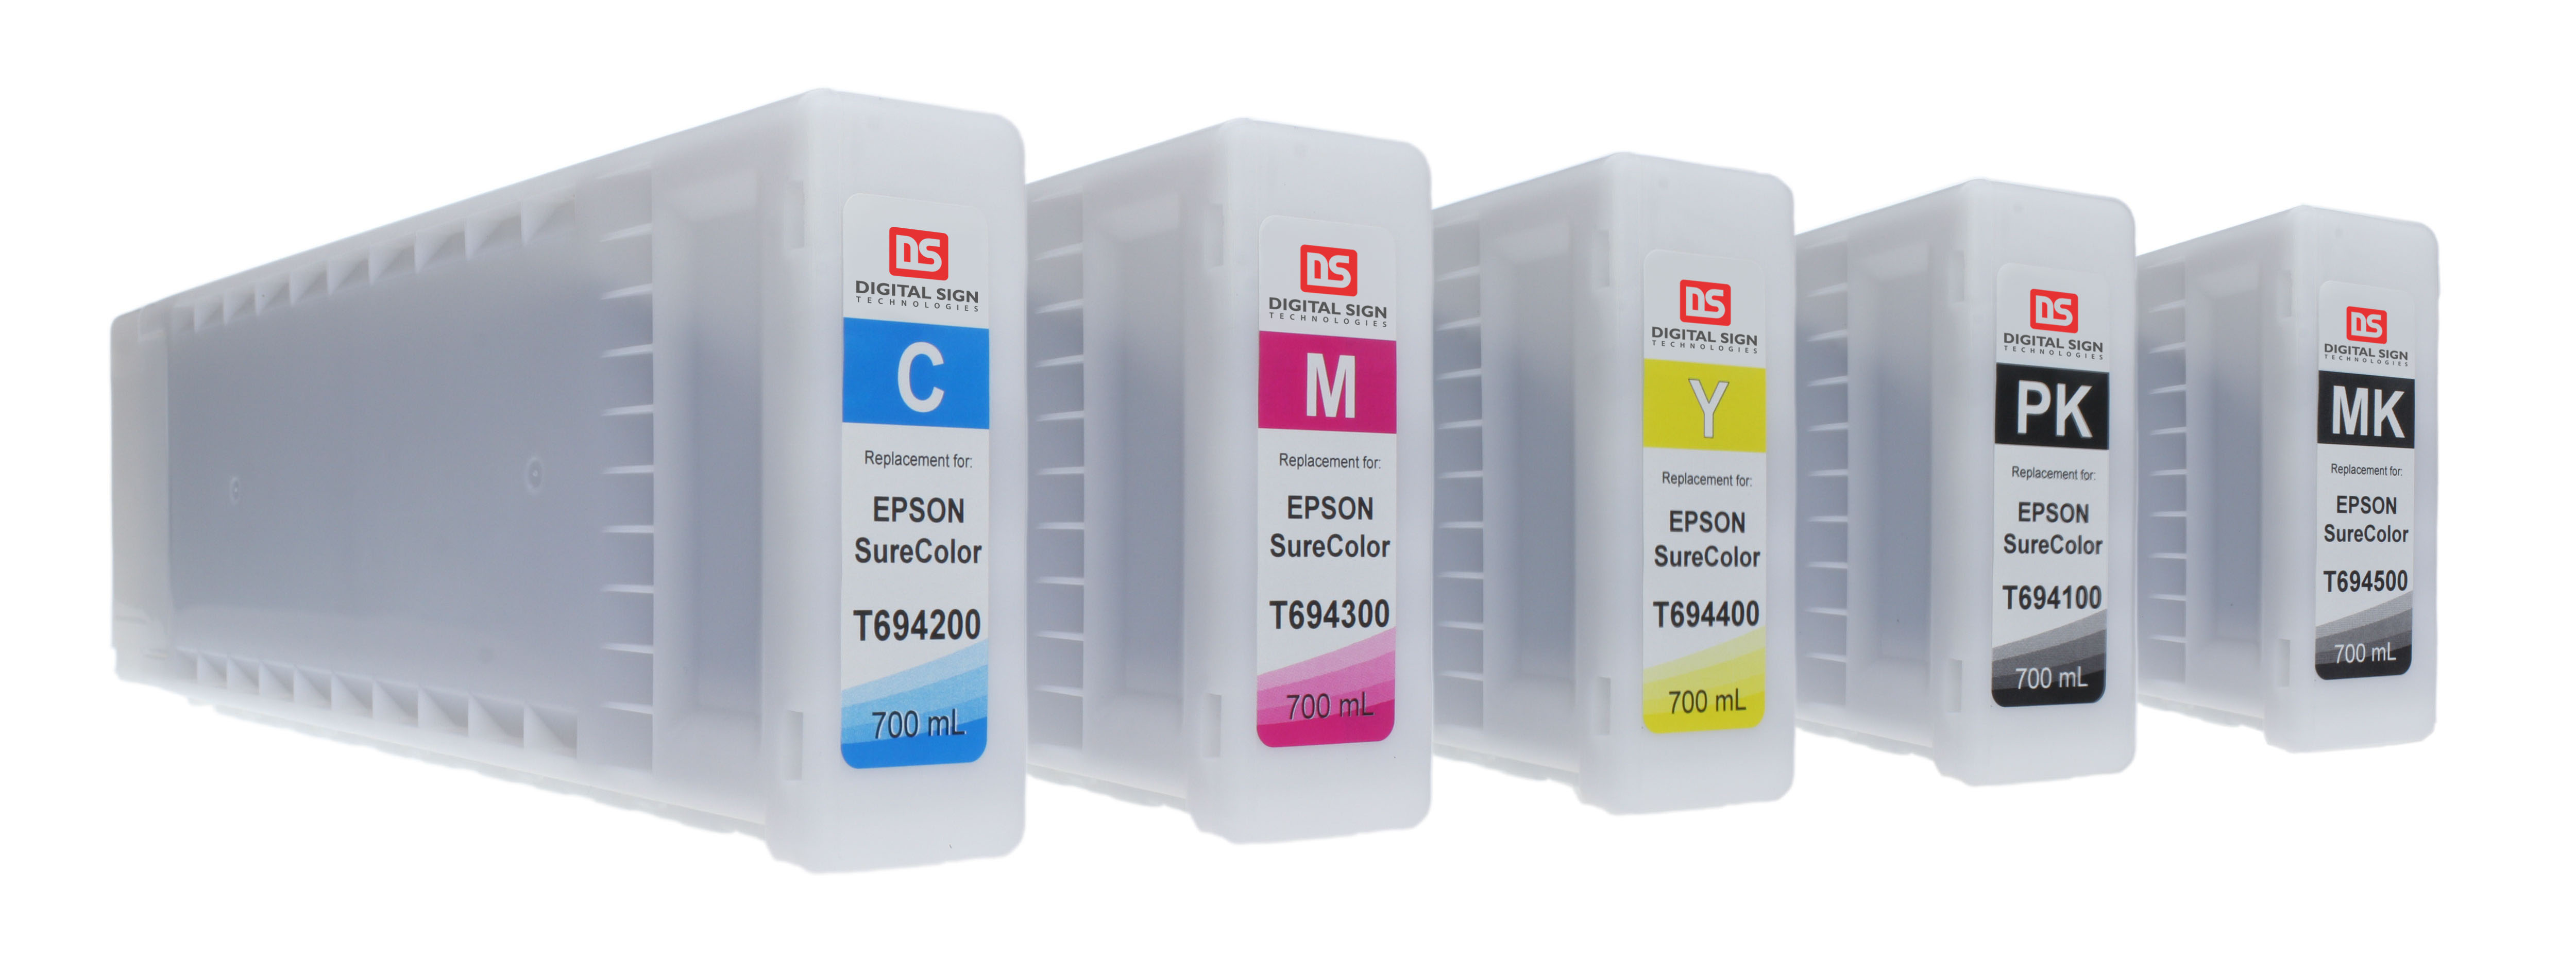 Epson UltraChrome XD ink cartridges by DST